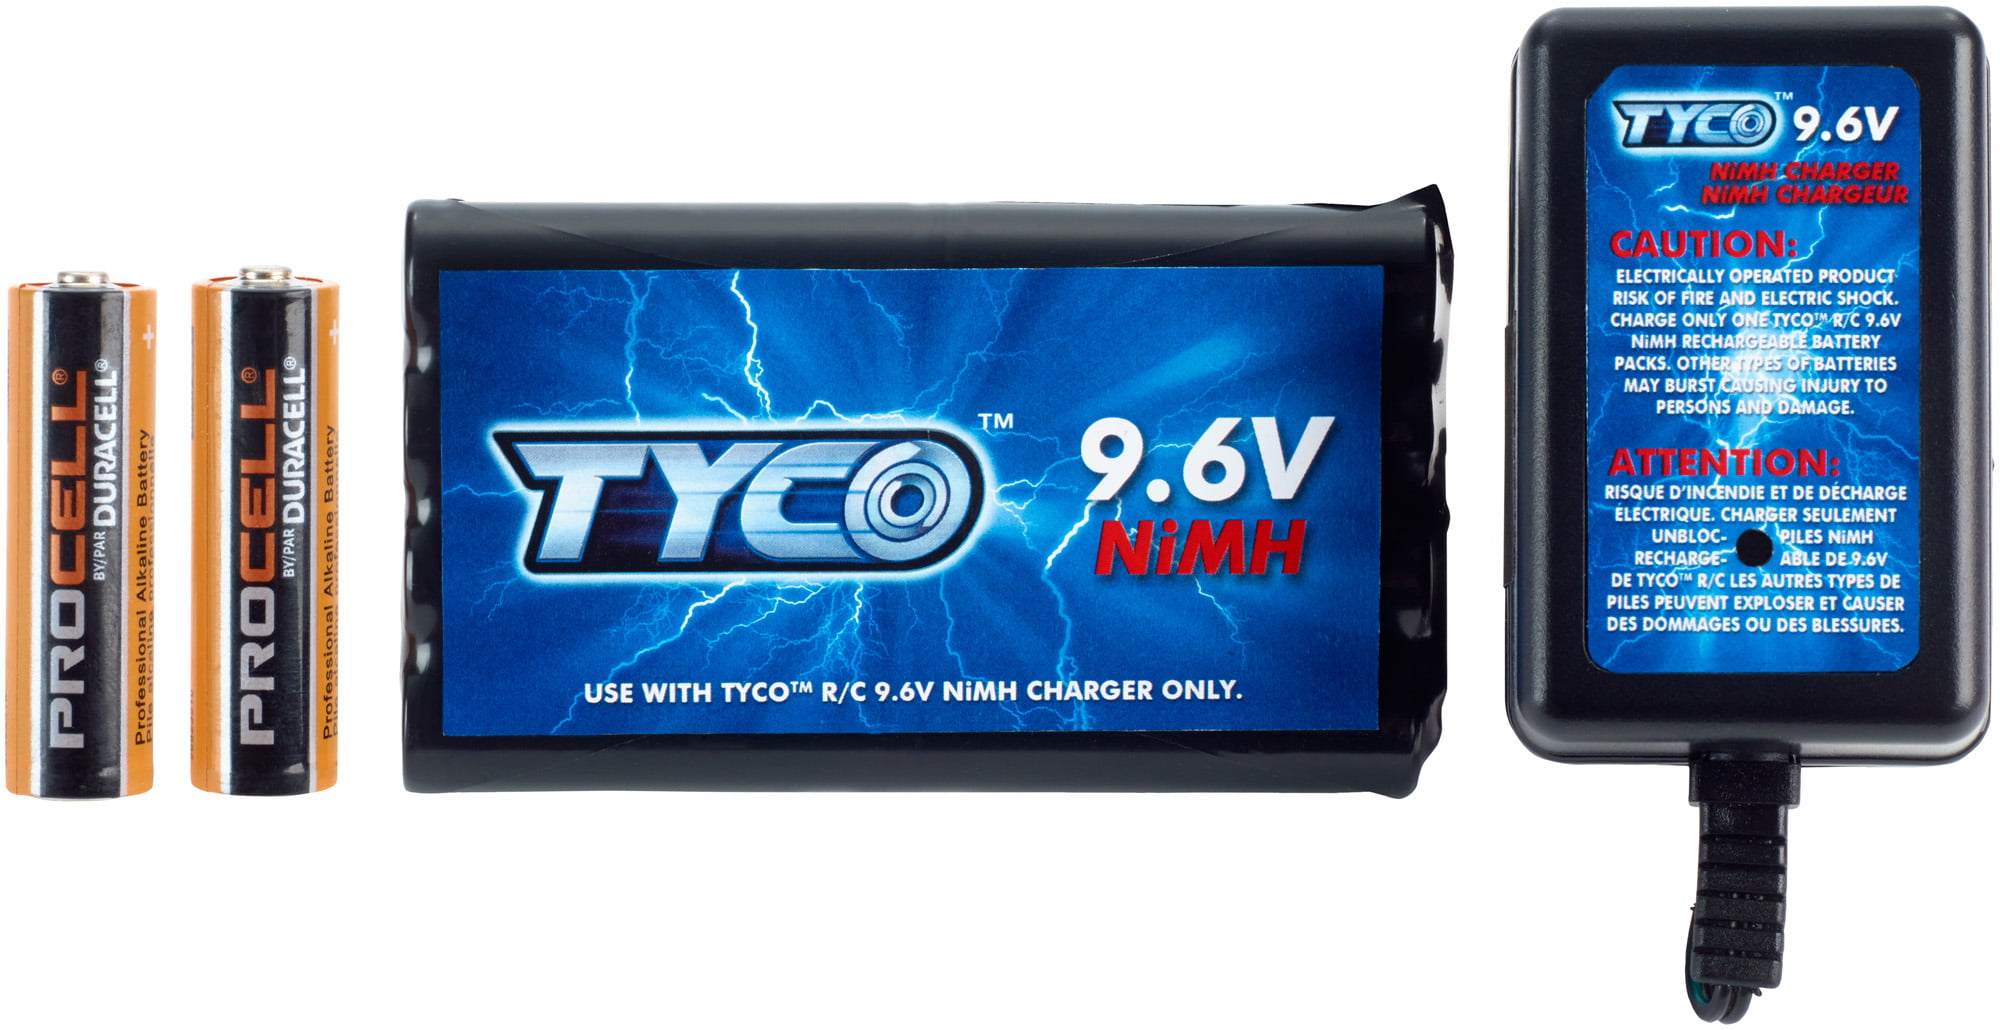 What are Tyco batteries?